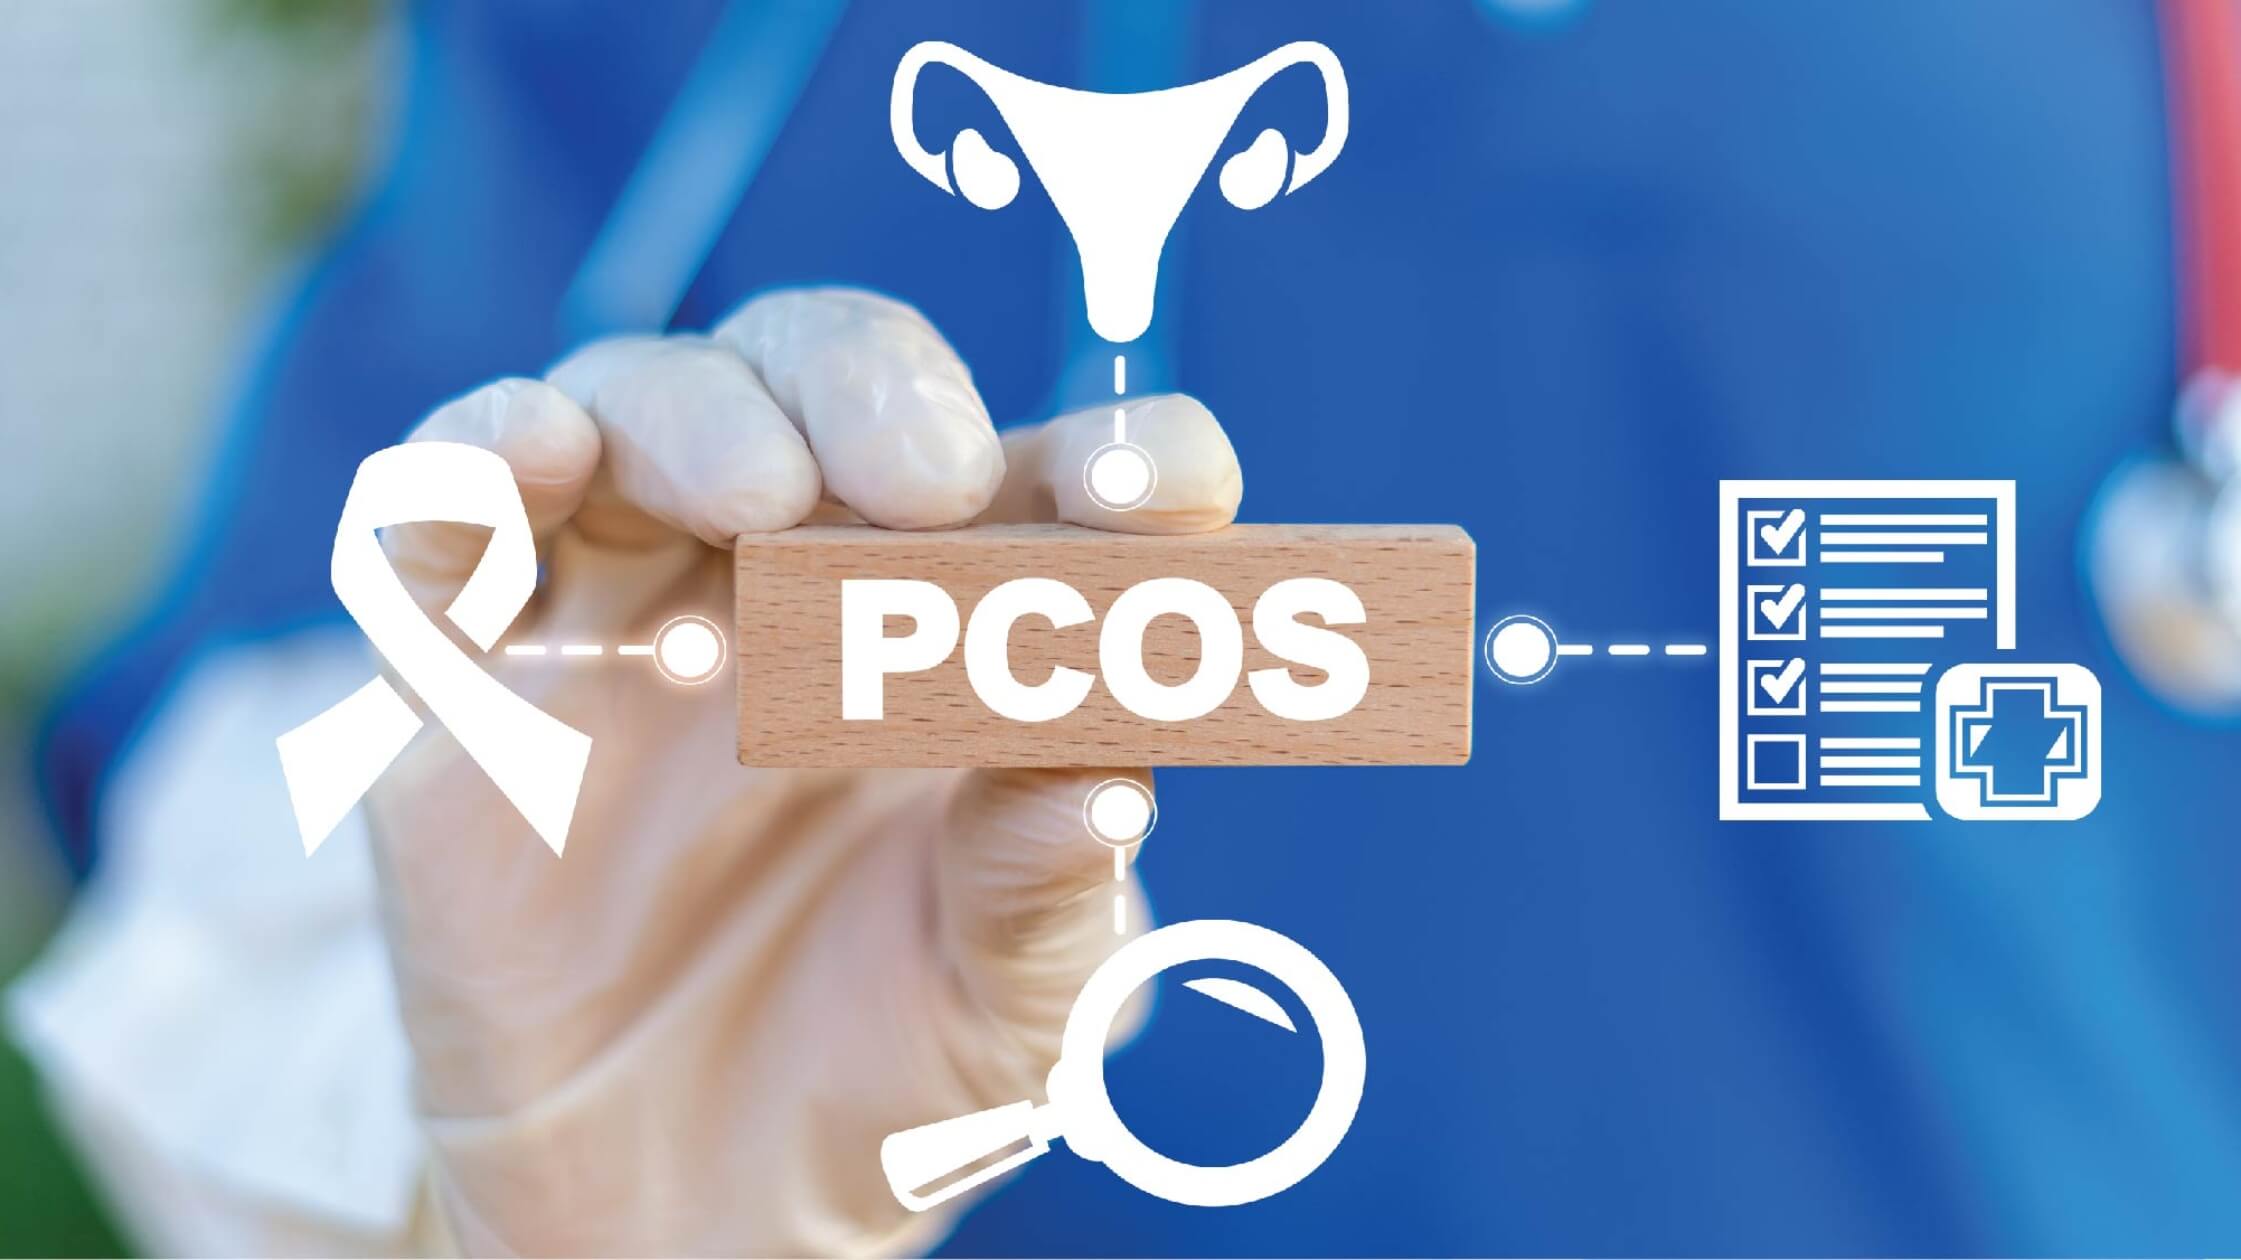 PCOS - Polycystic Ovarian Syndrome